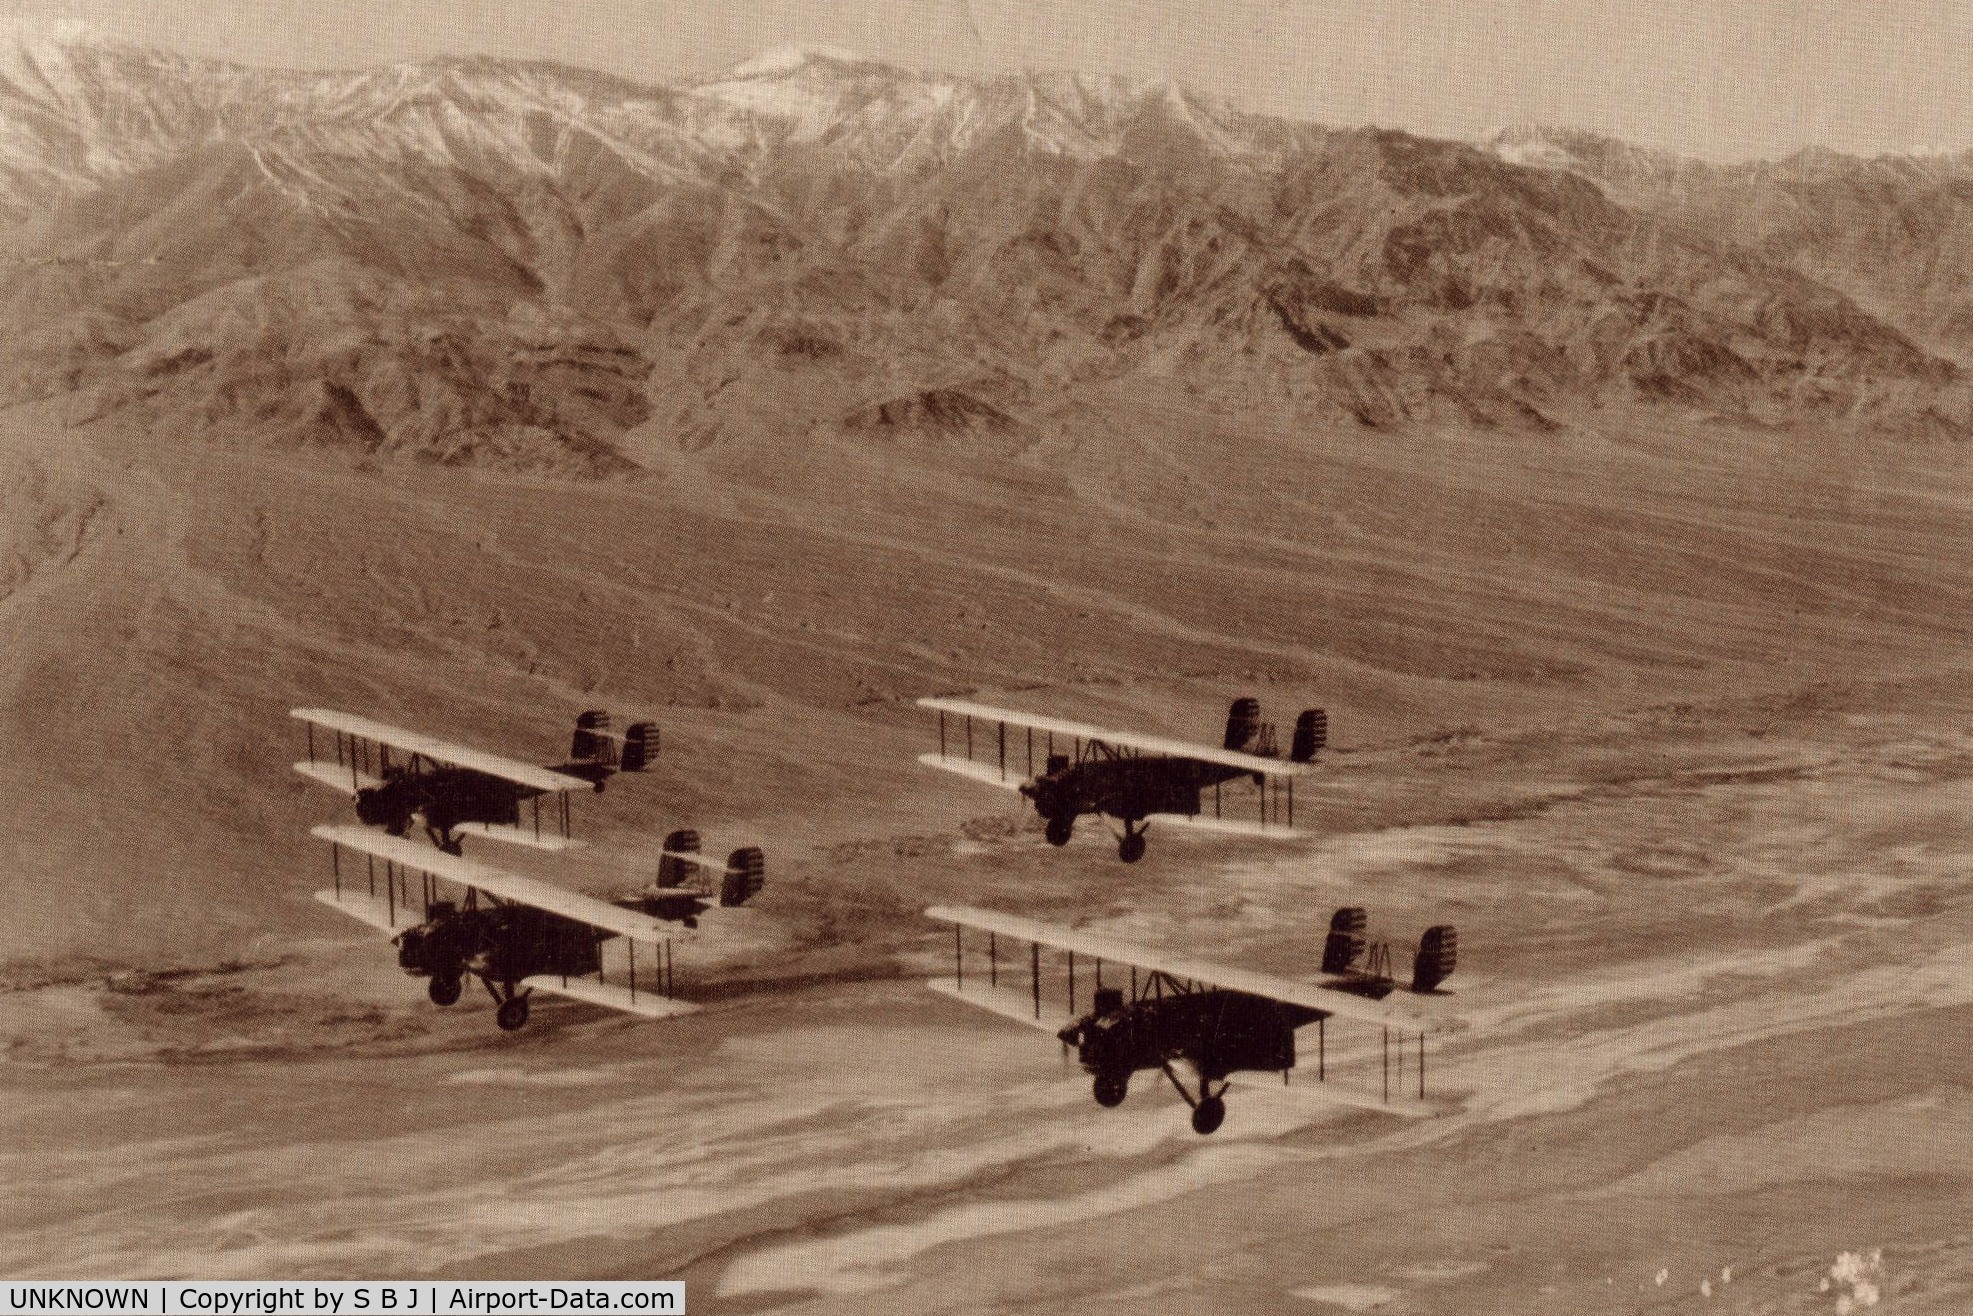 UNKNOWN, Miscellaneous Various C/N unknown, Army Air Corps Curtiss B2 Condors flying in Death Valley,Calif. in an unknown year, but the B2 was made from 1929-30 and ended service with the military in 1934.Must have been a nice ride in that rear B2 from wake turbulence.